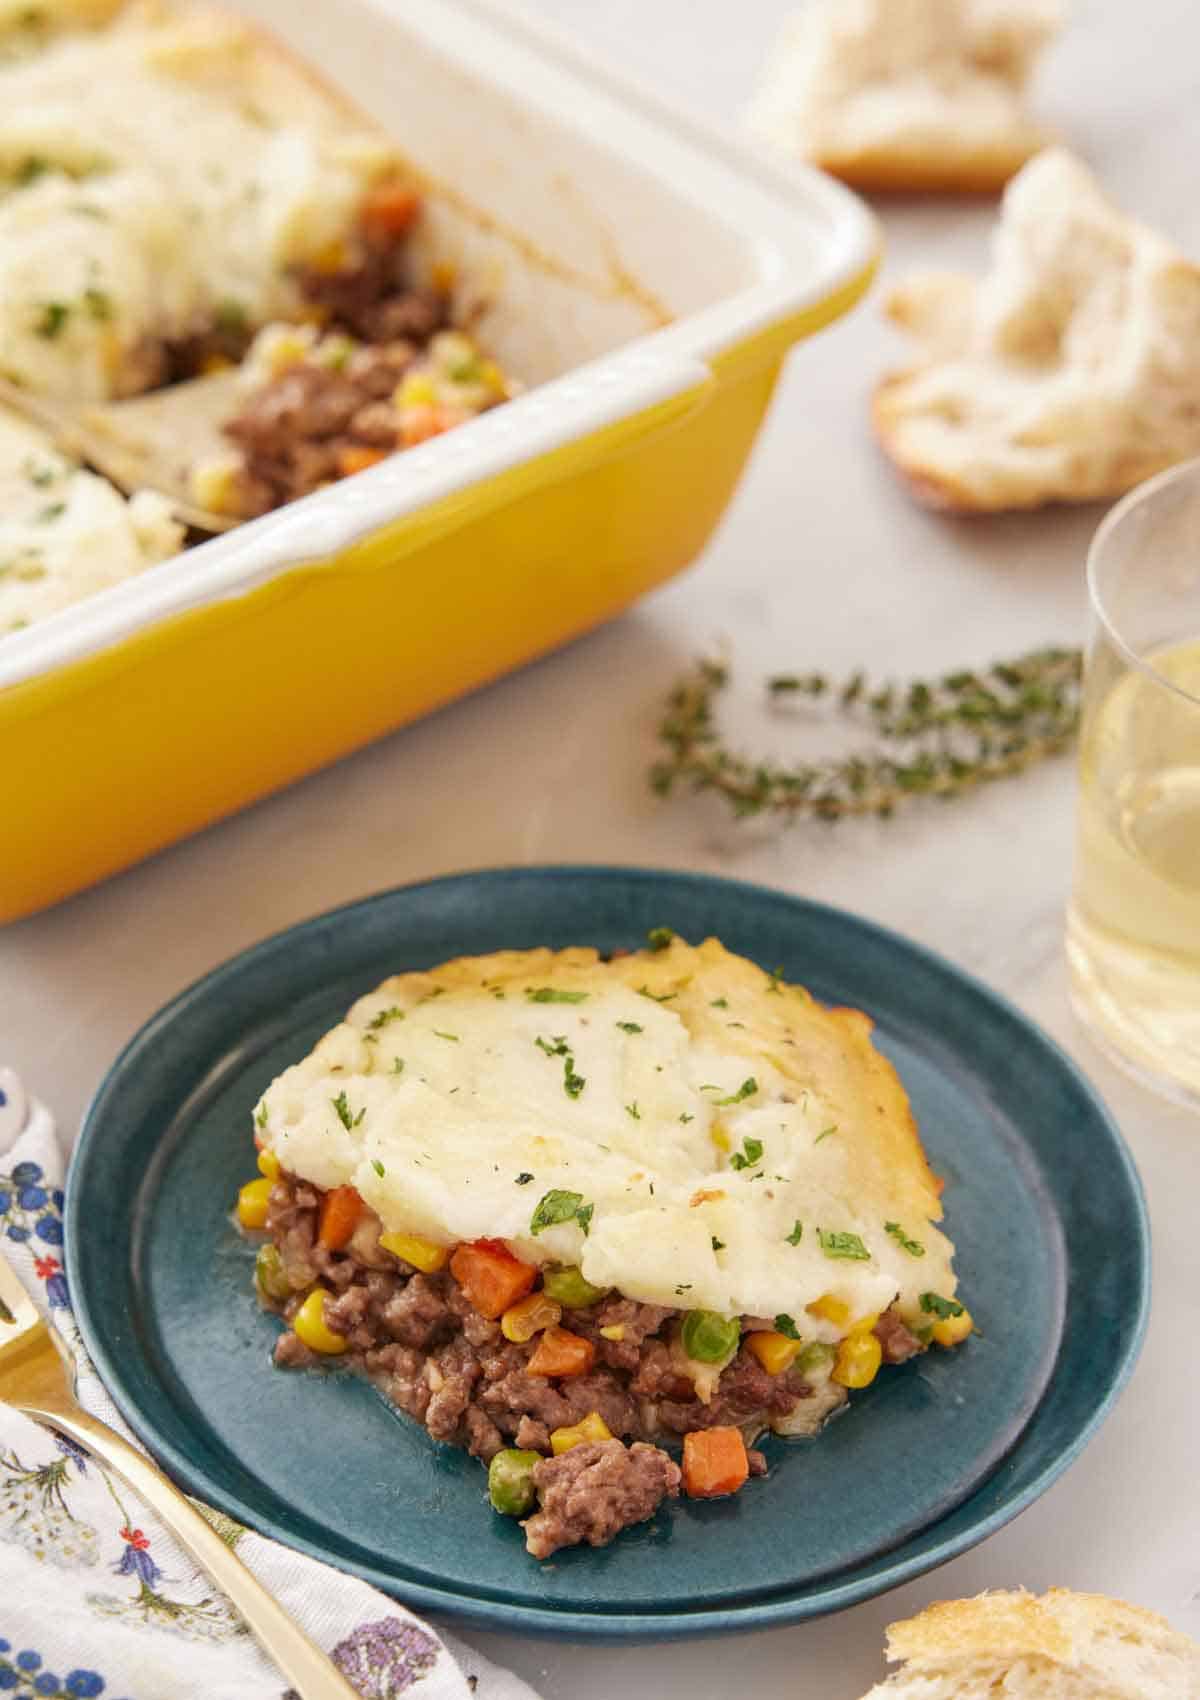 A plate with a serving of shepherd's pie with a baking dish in the back.